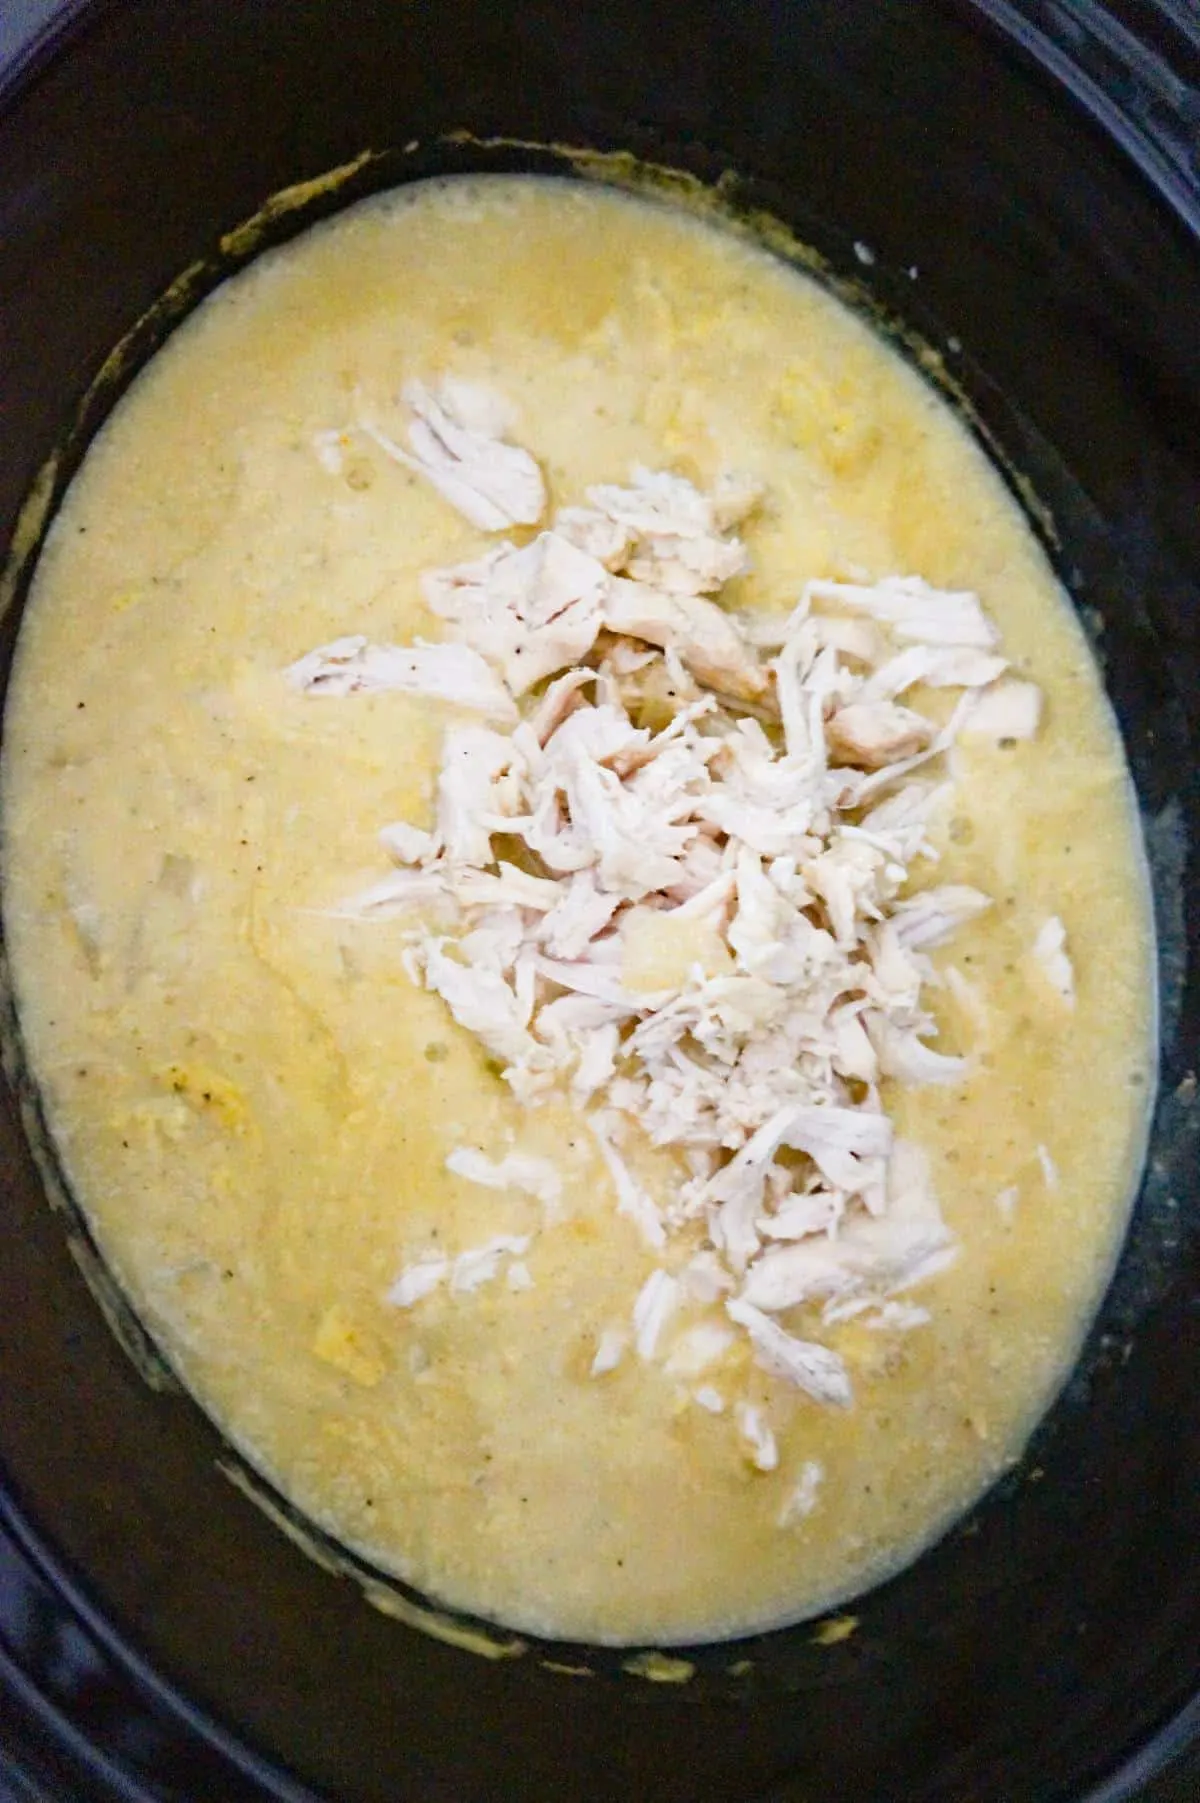 cooked shredded chicken on top of creamy chicken sauce mixture in a slow cooker